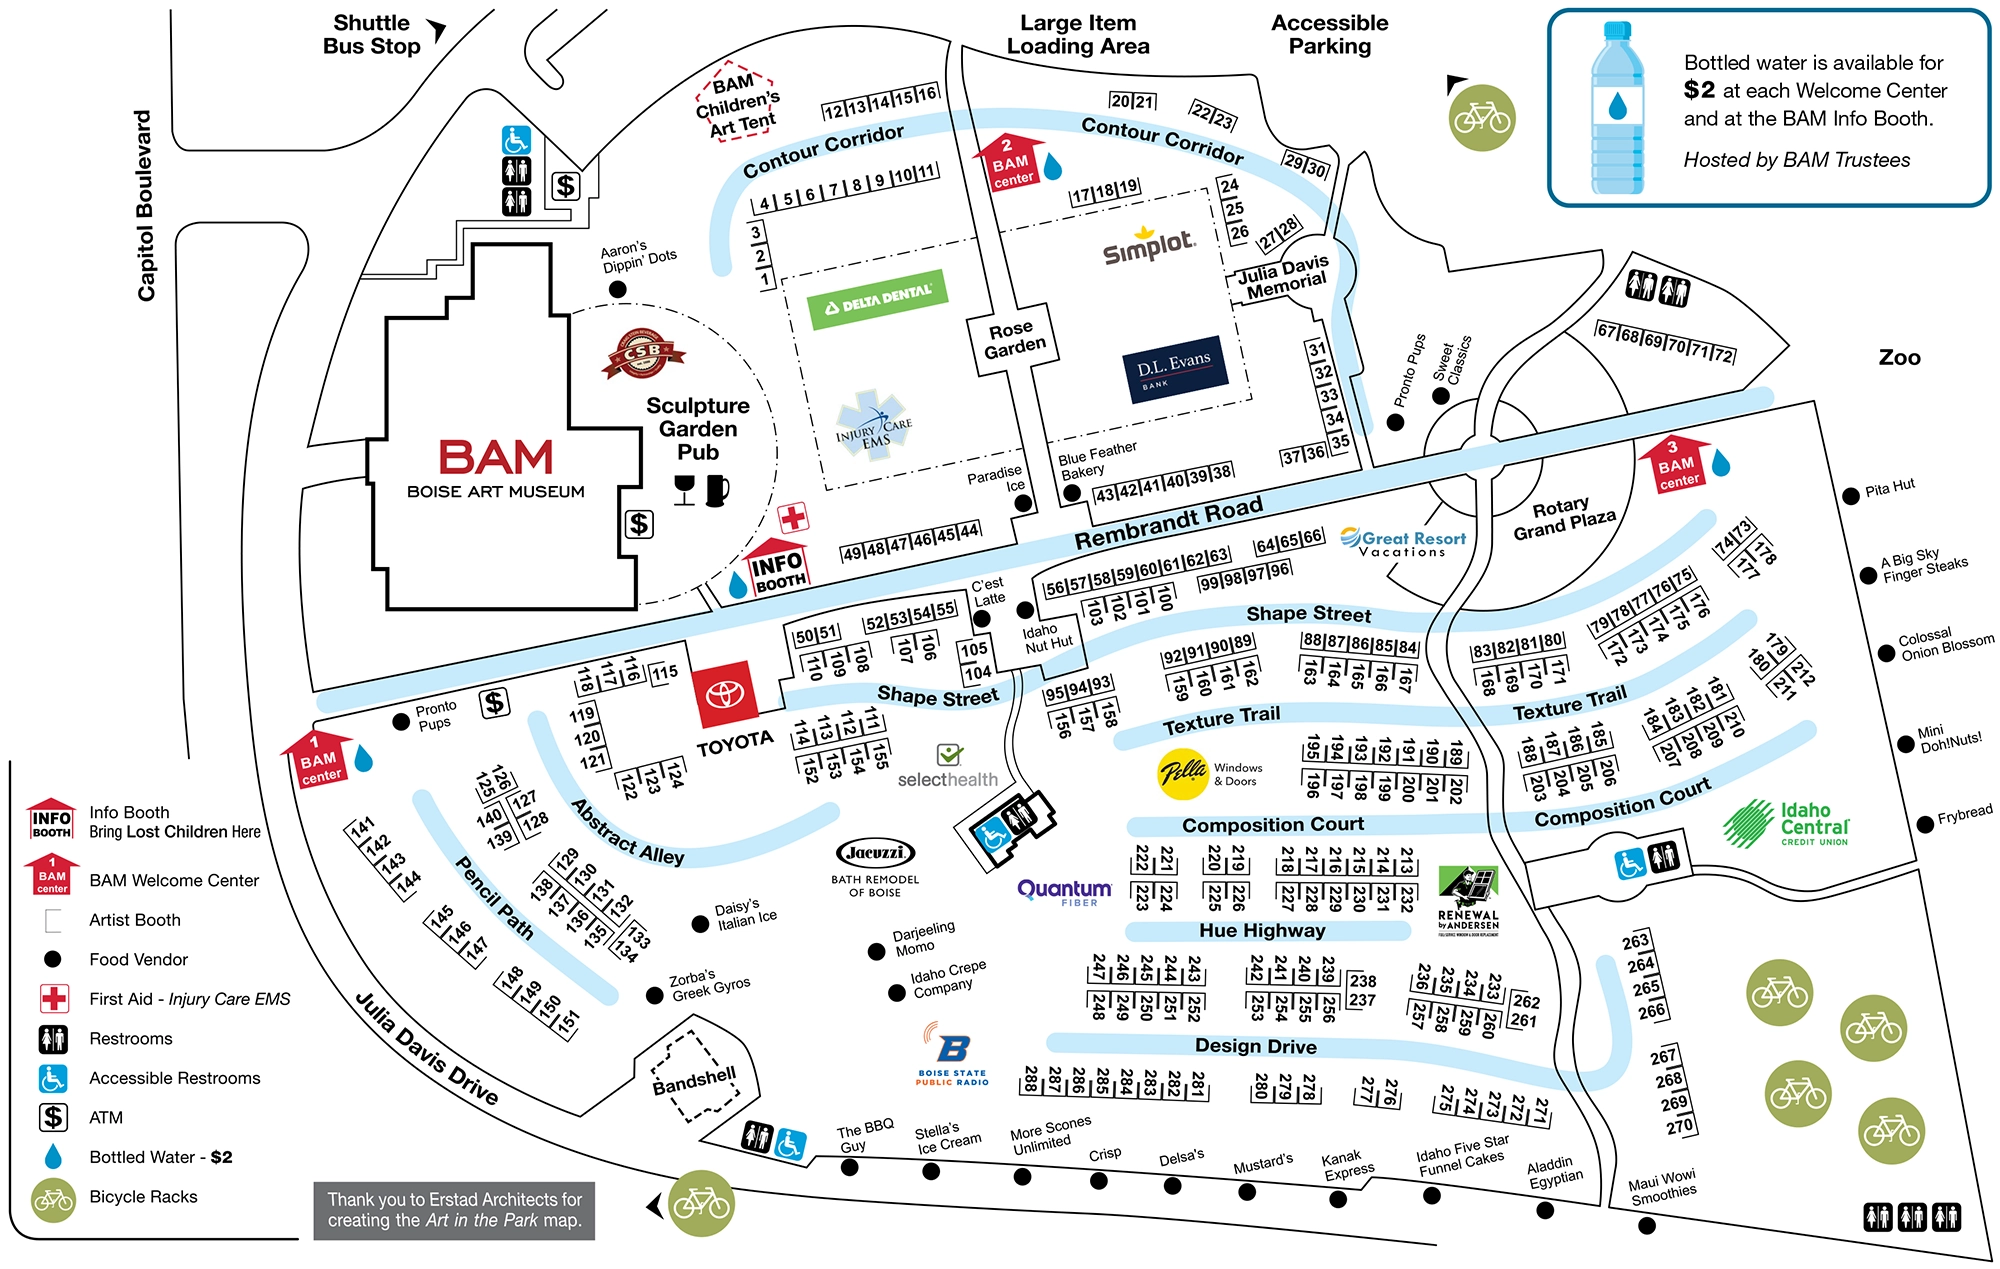 The event map for Art in the Park, showing the locations of the Info booth, BAM Welcome Centers, artist booths, food vendors, first aid, restrooms, ATMs, the Bandshell, bottled water, and bike racks.